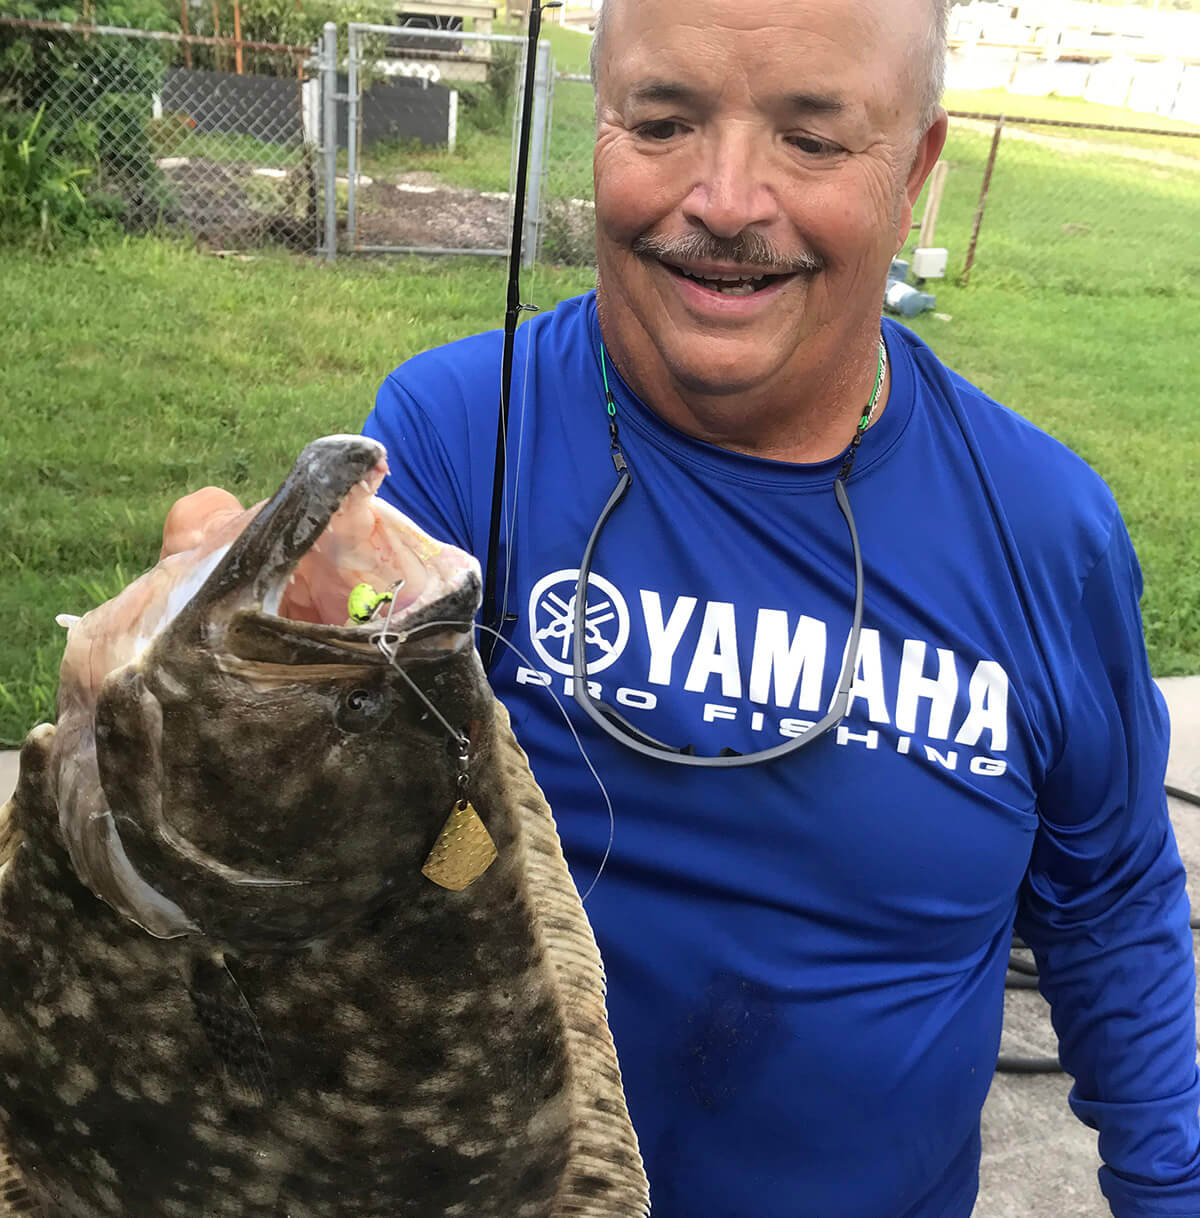 3 Tips For Catching Flounder On Artificial Lures